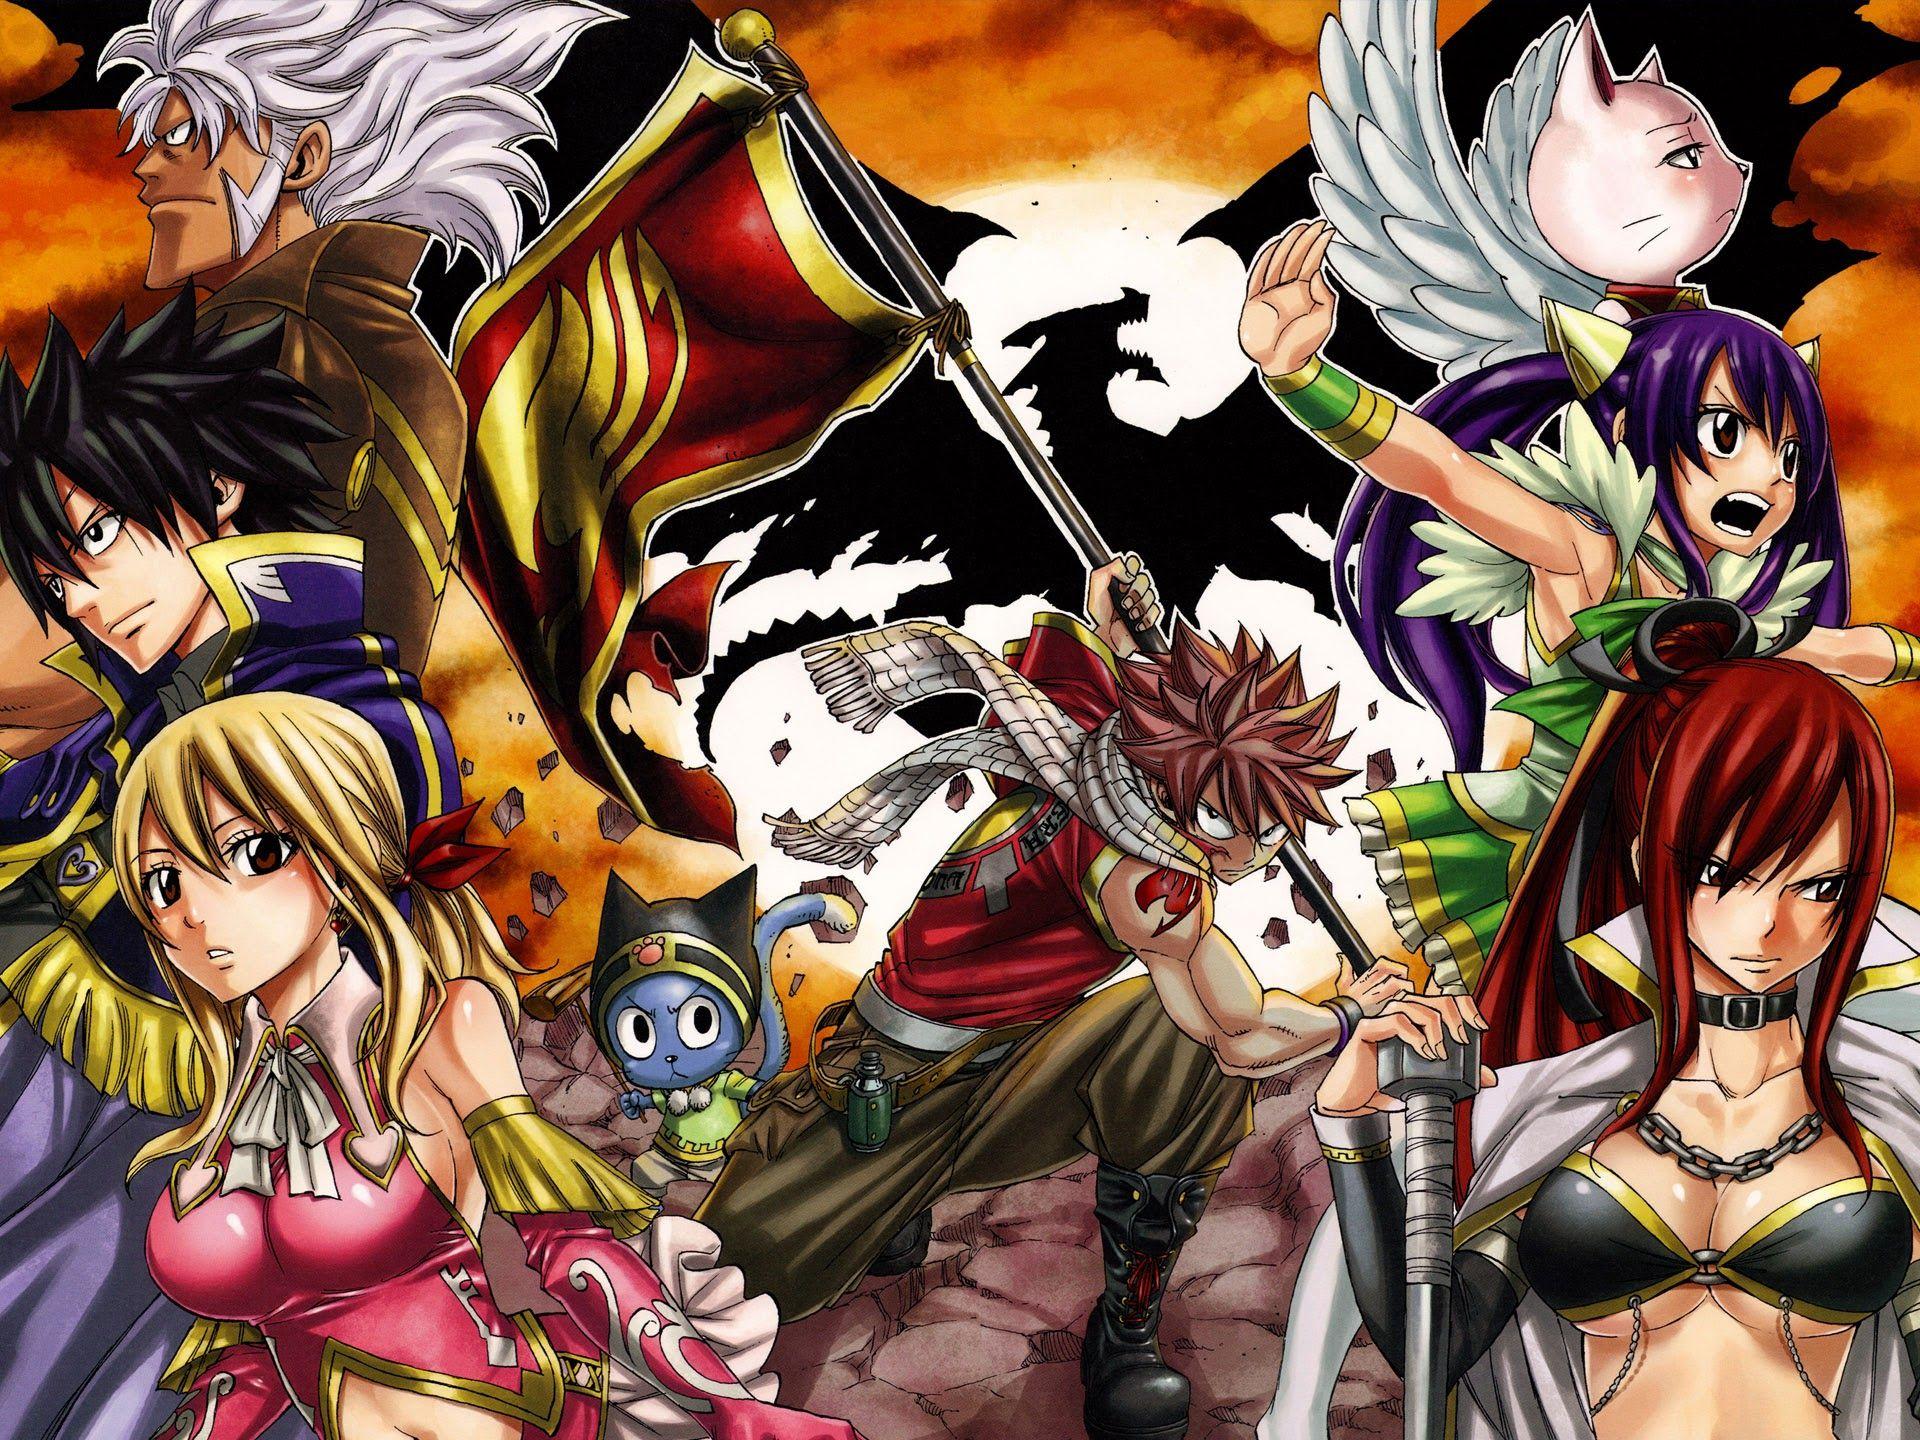 Download Fairy Tail Aesthetic Main Characters Wallpaper